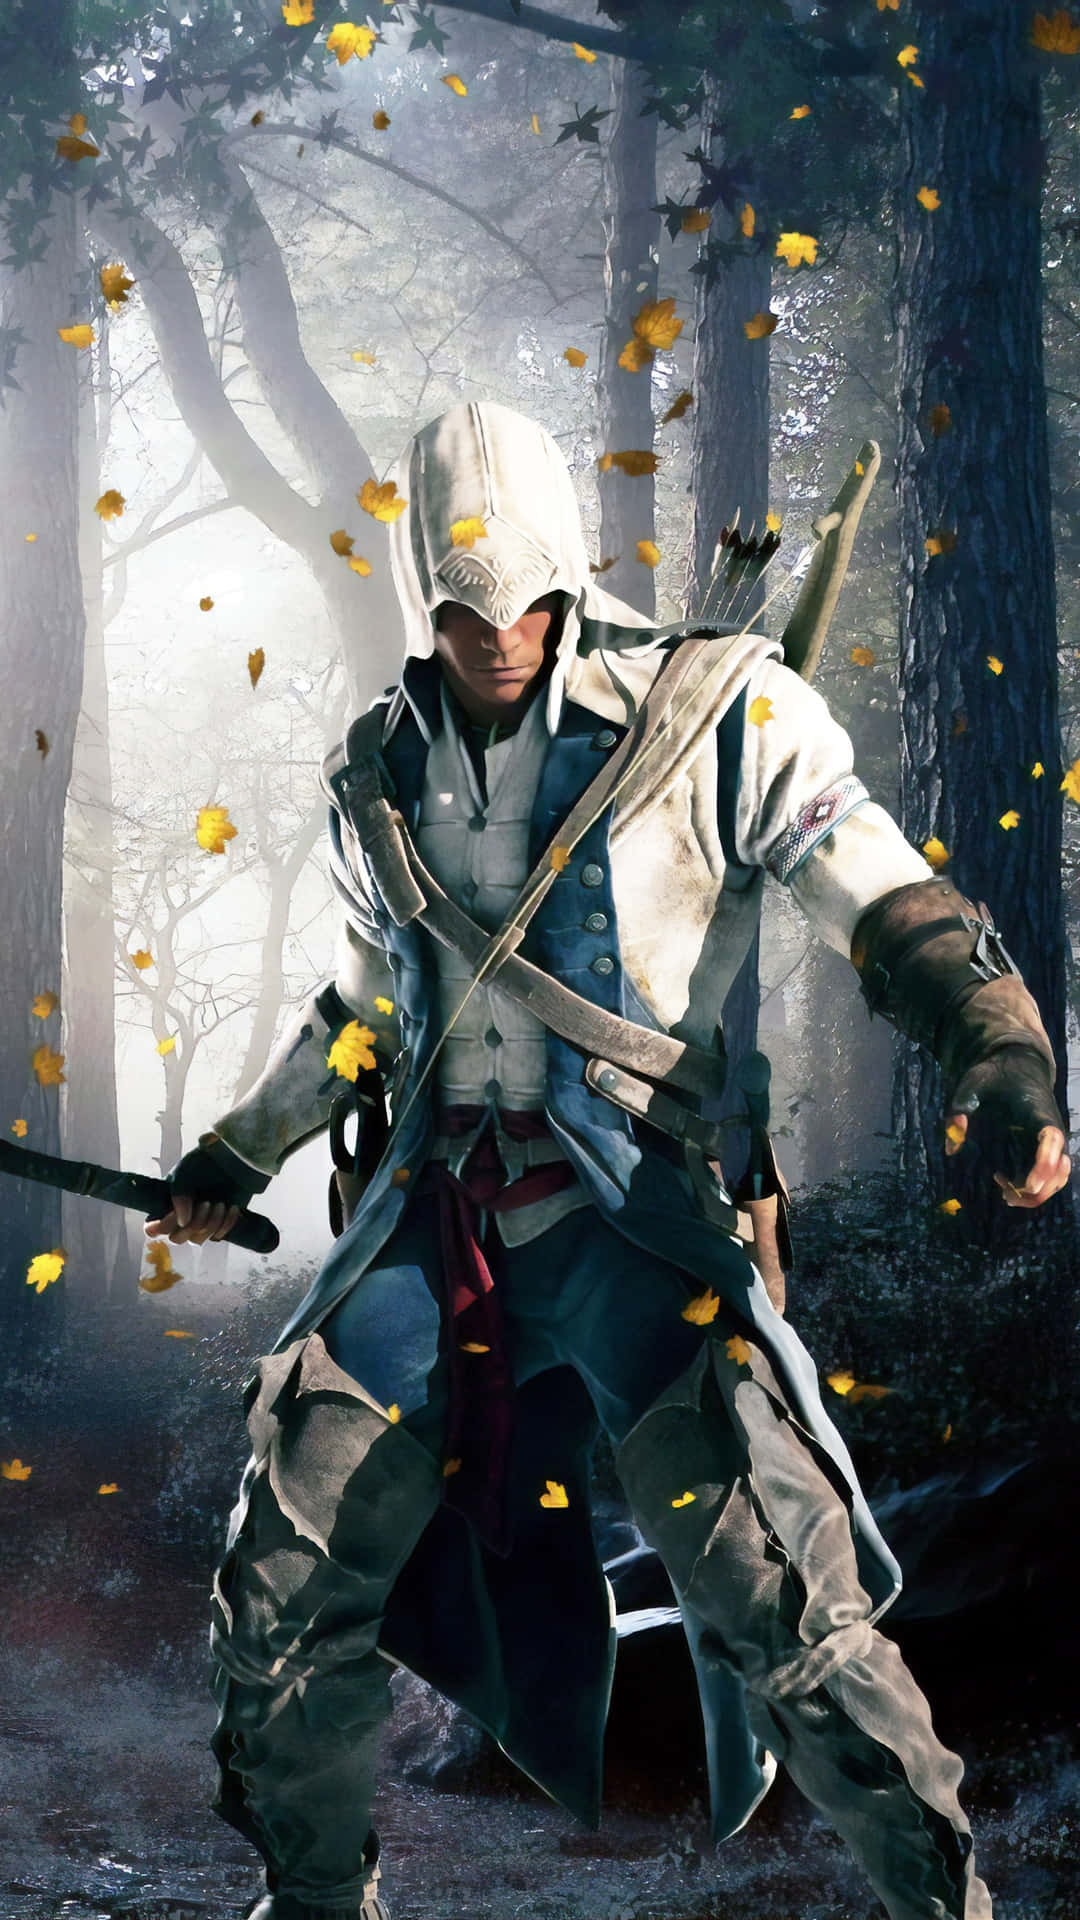 Assassin's Creed Iii - A Man With A Sword In The Woods